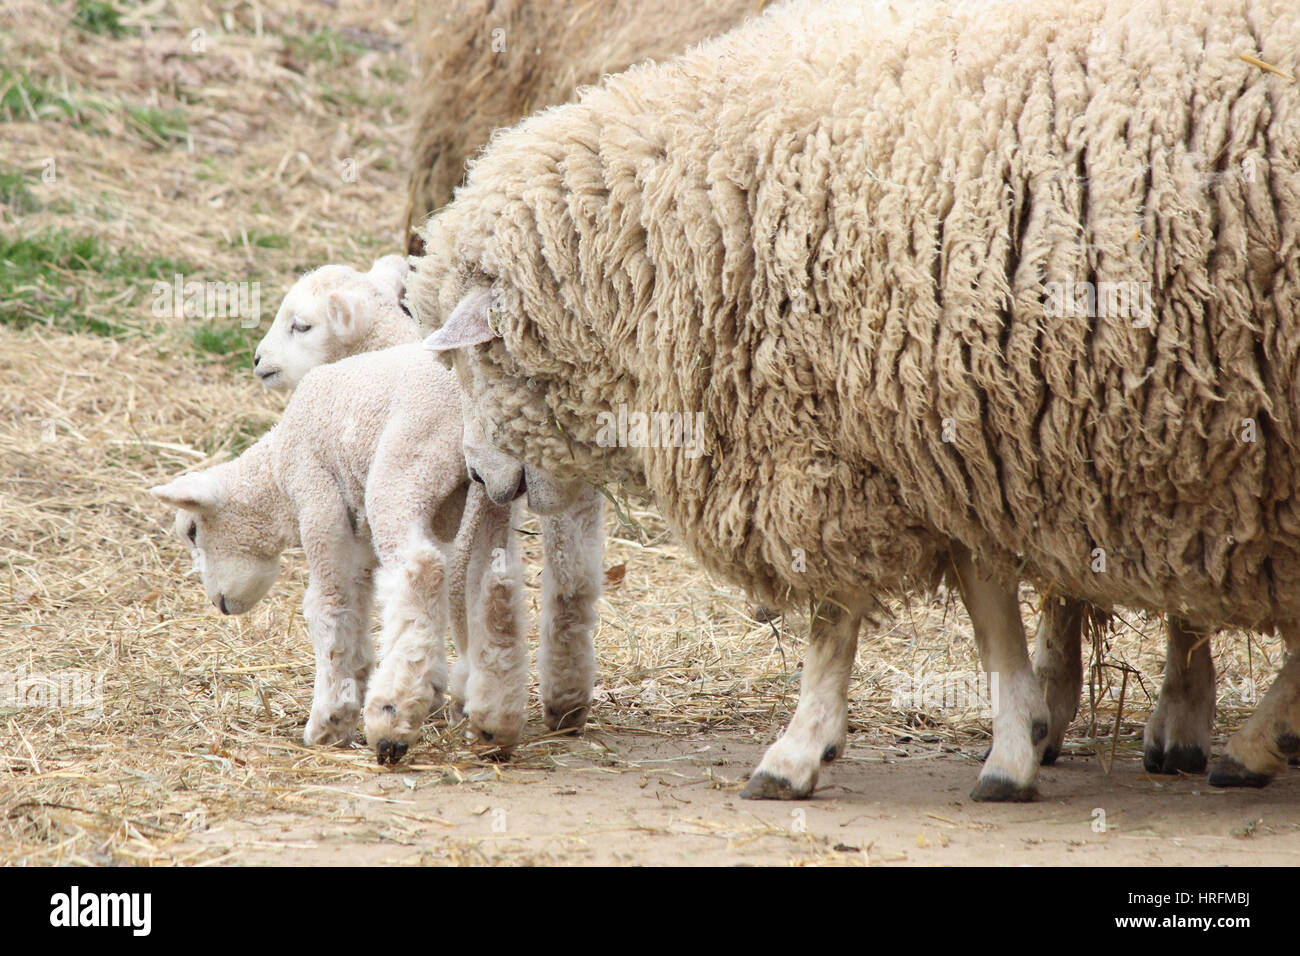 A white mother sheep in pasture with her two baby lambs Stock Photo